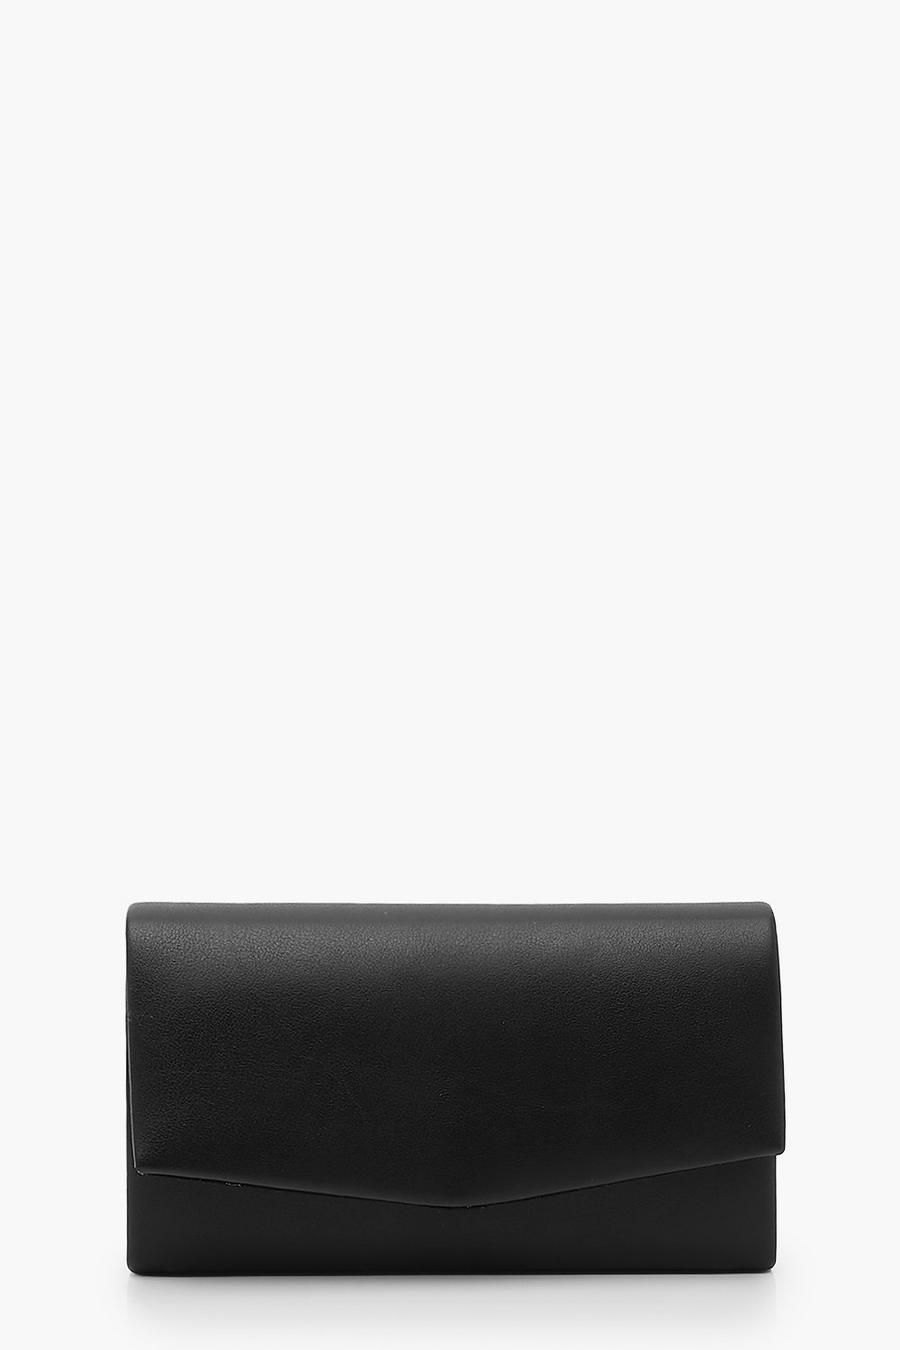 Black Smooth PU Structured Clutch Bag & Chain image number 1